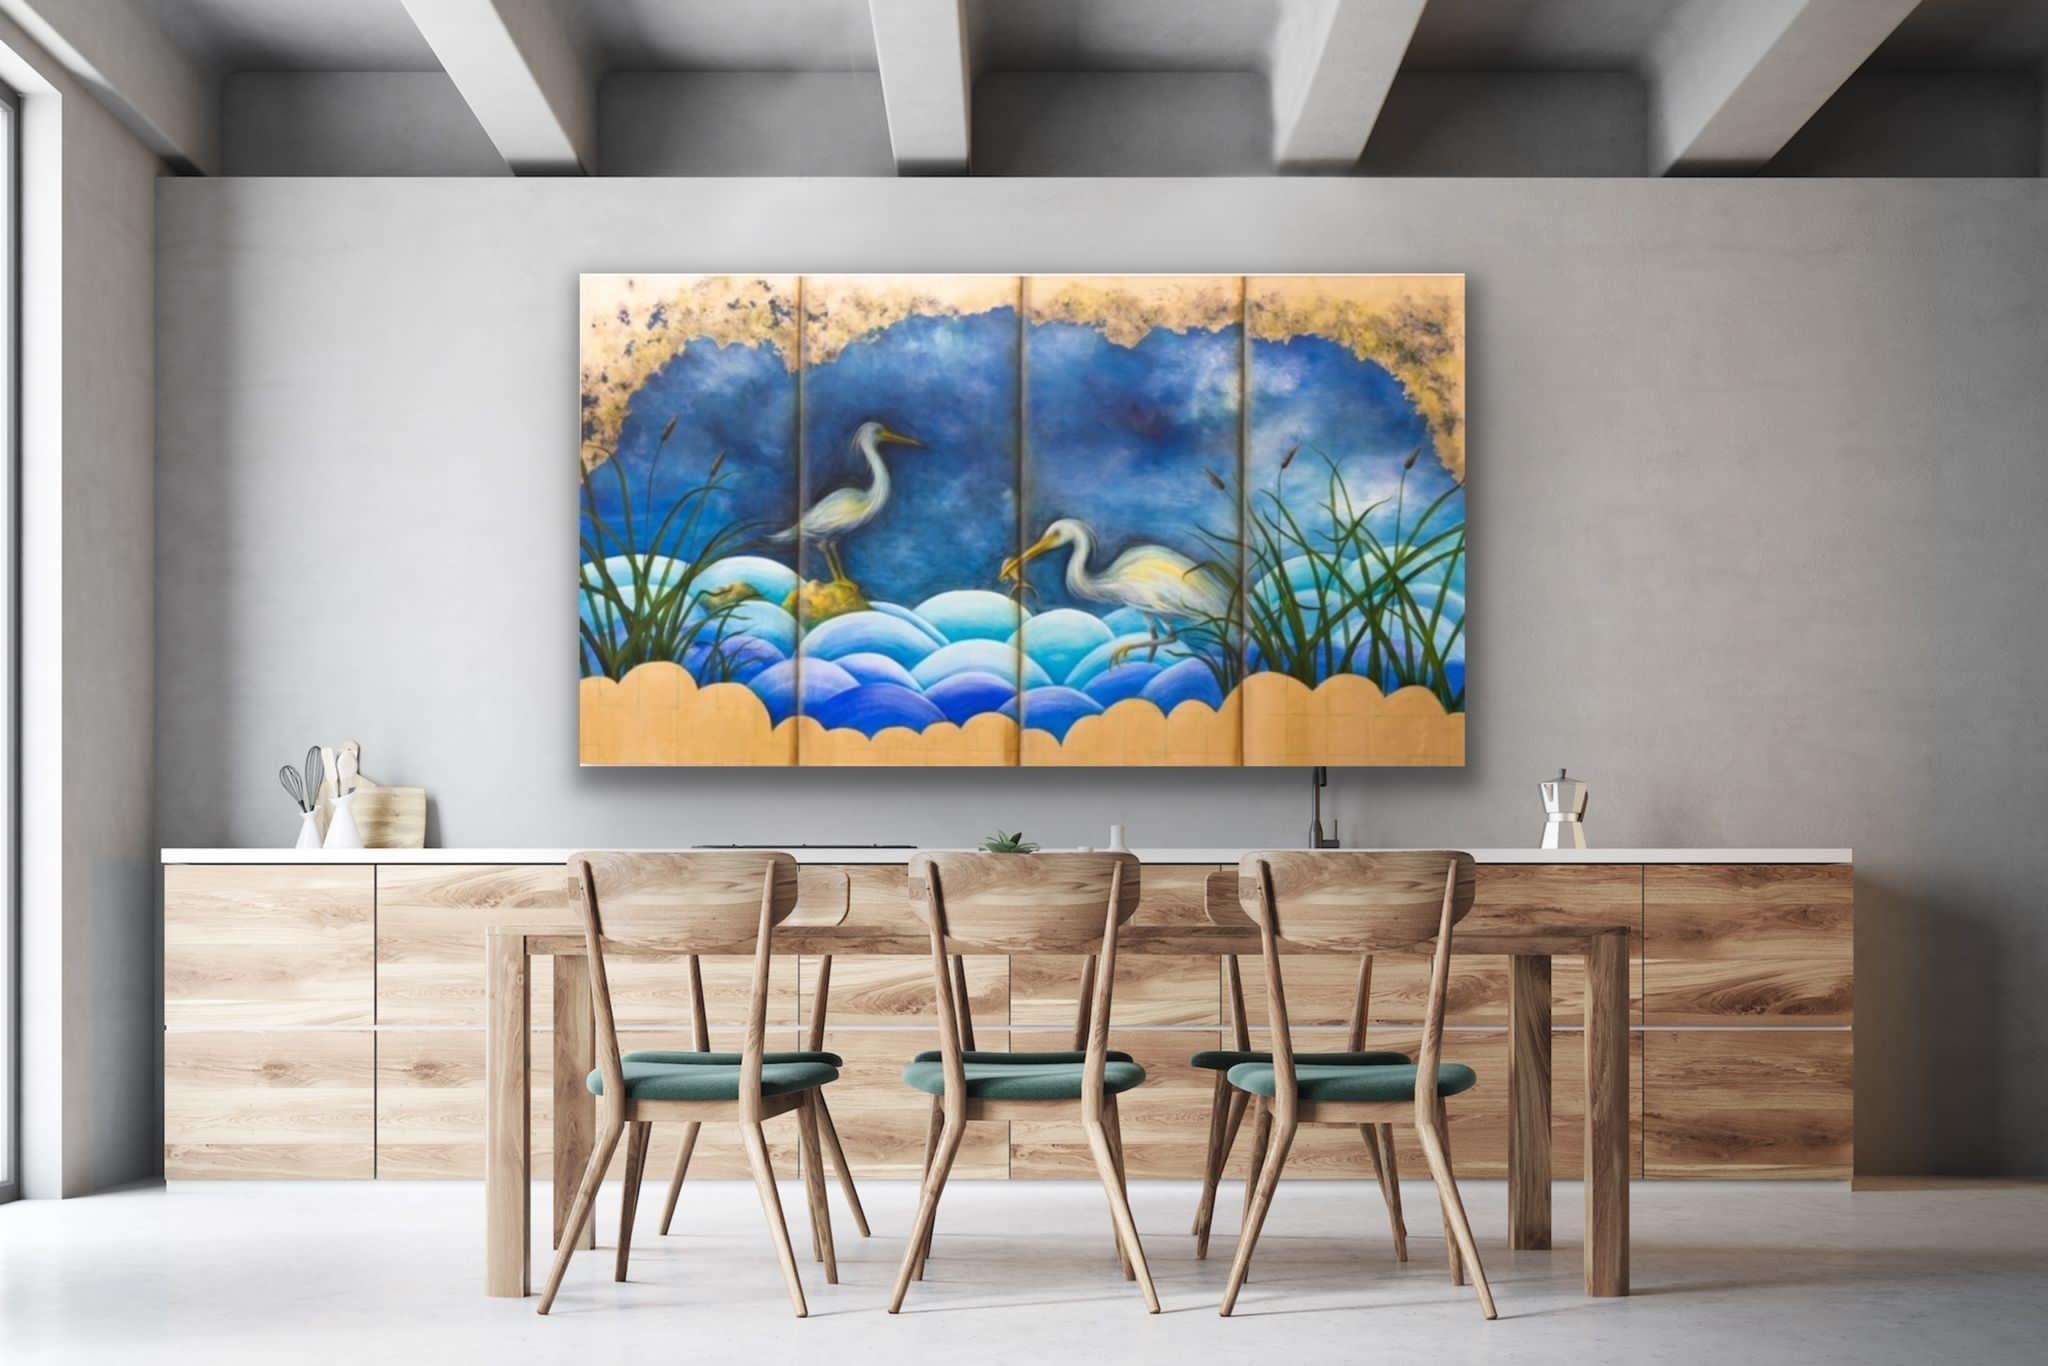 Inspired by the highly decorative wallpapers of the Art Deco period. Painted to look like panels on a screen. The dividing lines are in fact trompe l’oeil, to trick the eye. Rich blues and gold create a sense of moonlight on the water. The colours